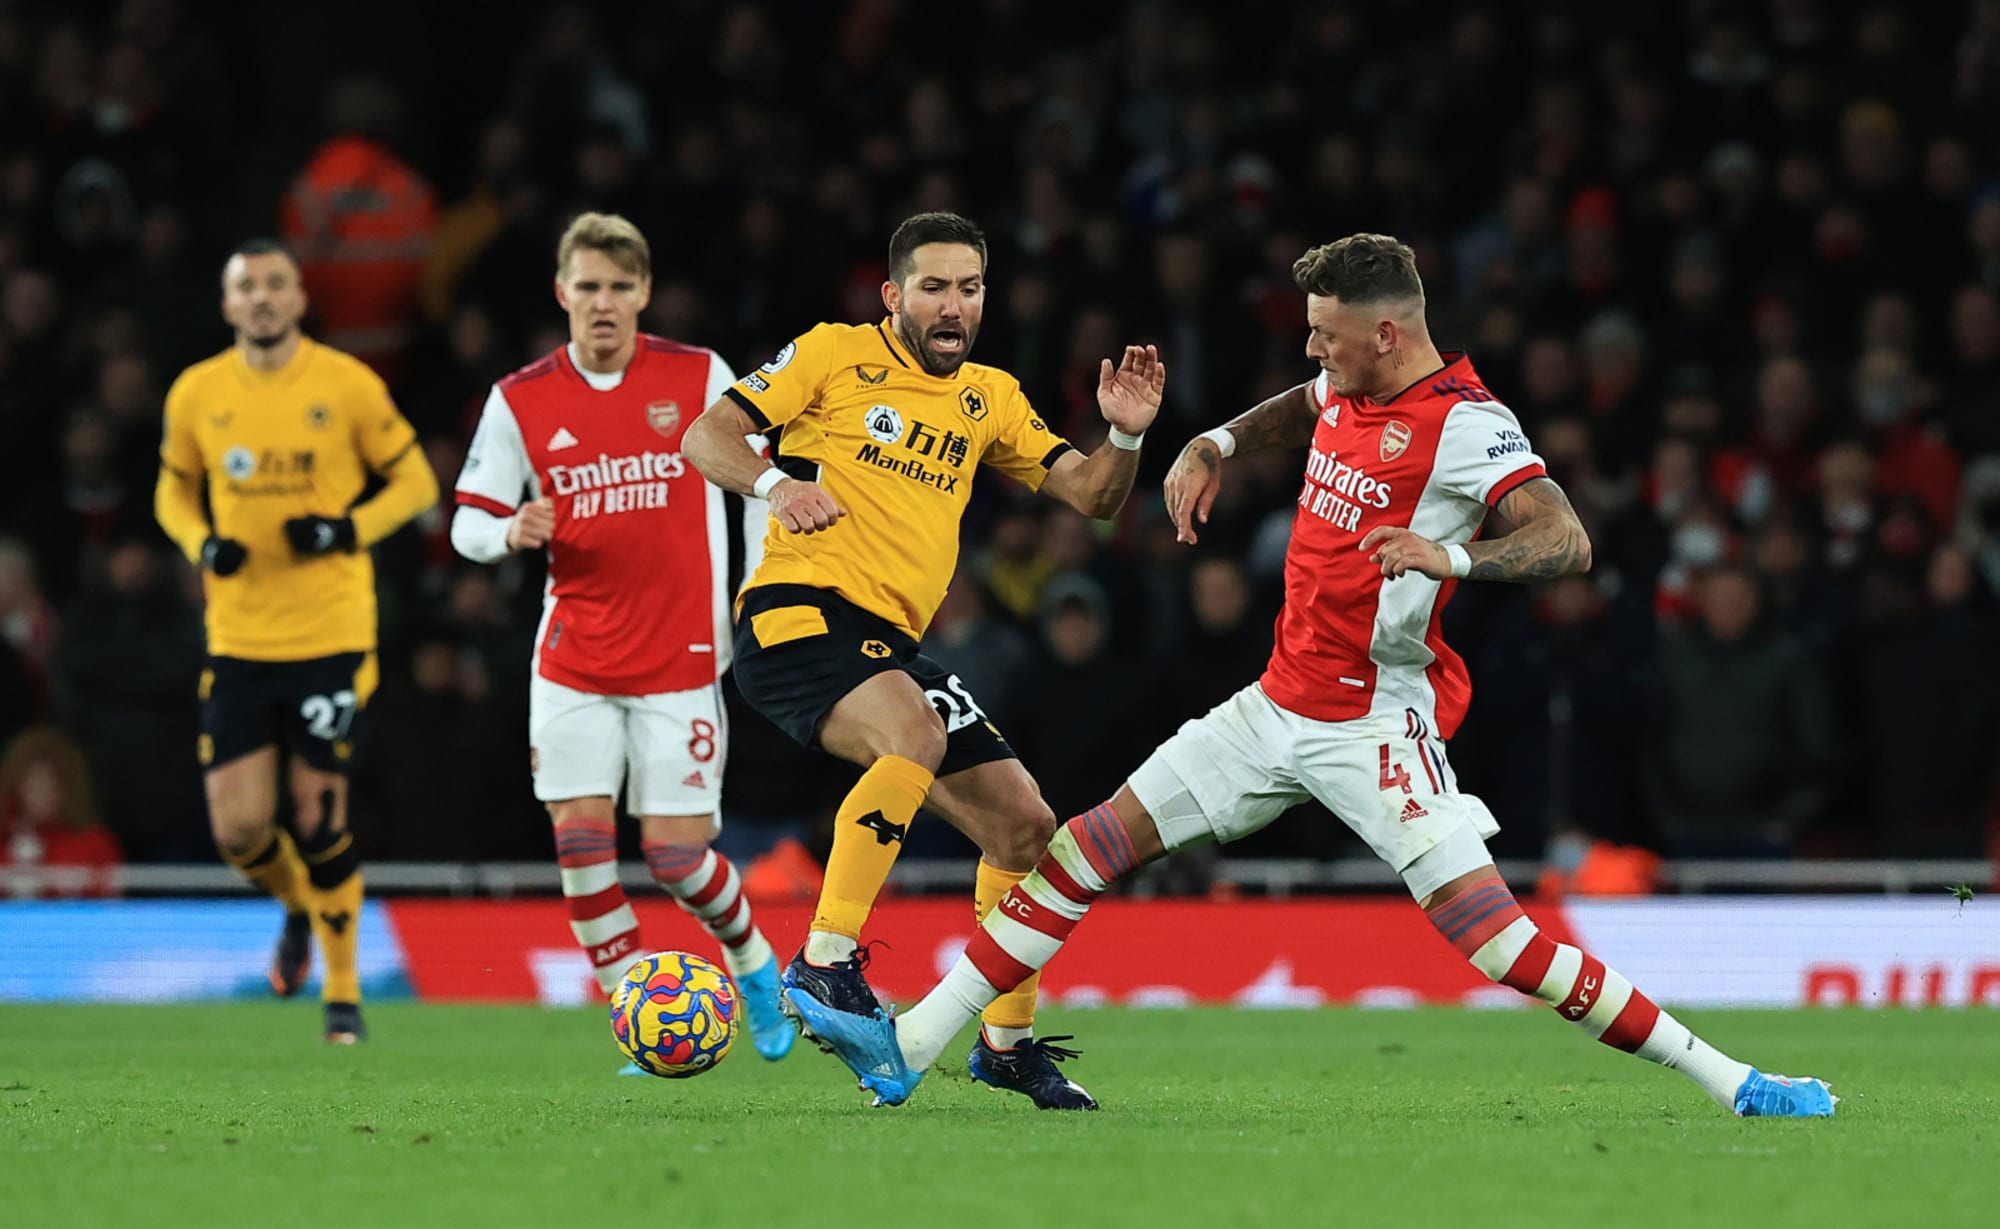 Arsenal 2-1 Wolves: 3 standout individual performances